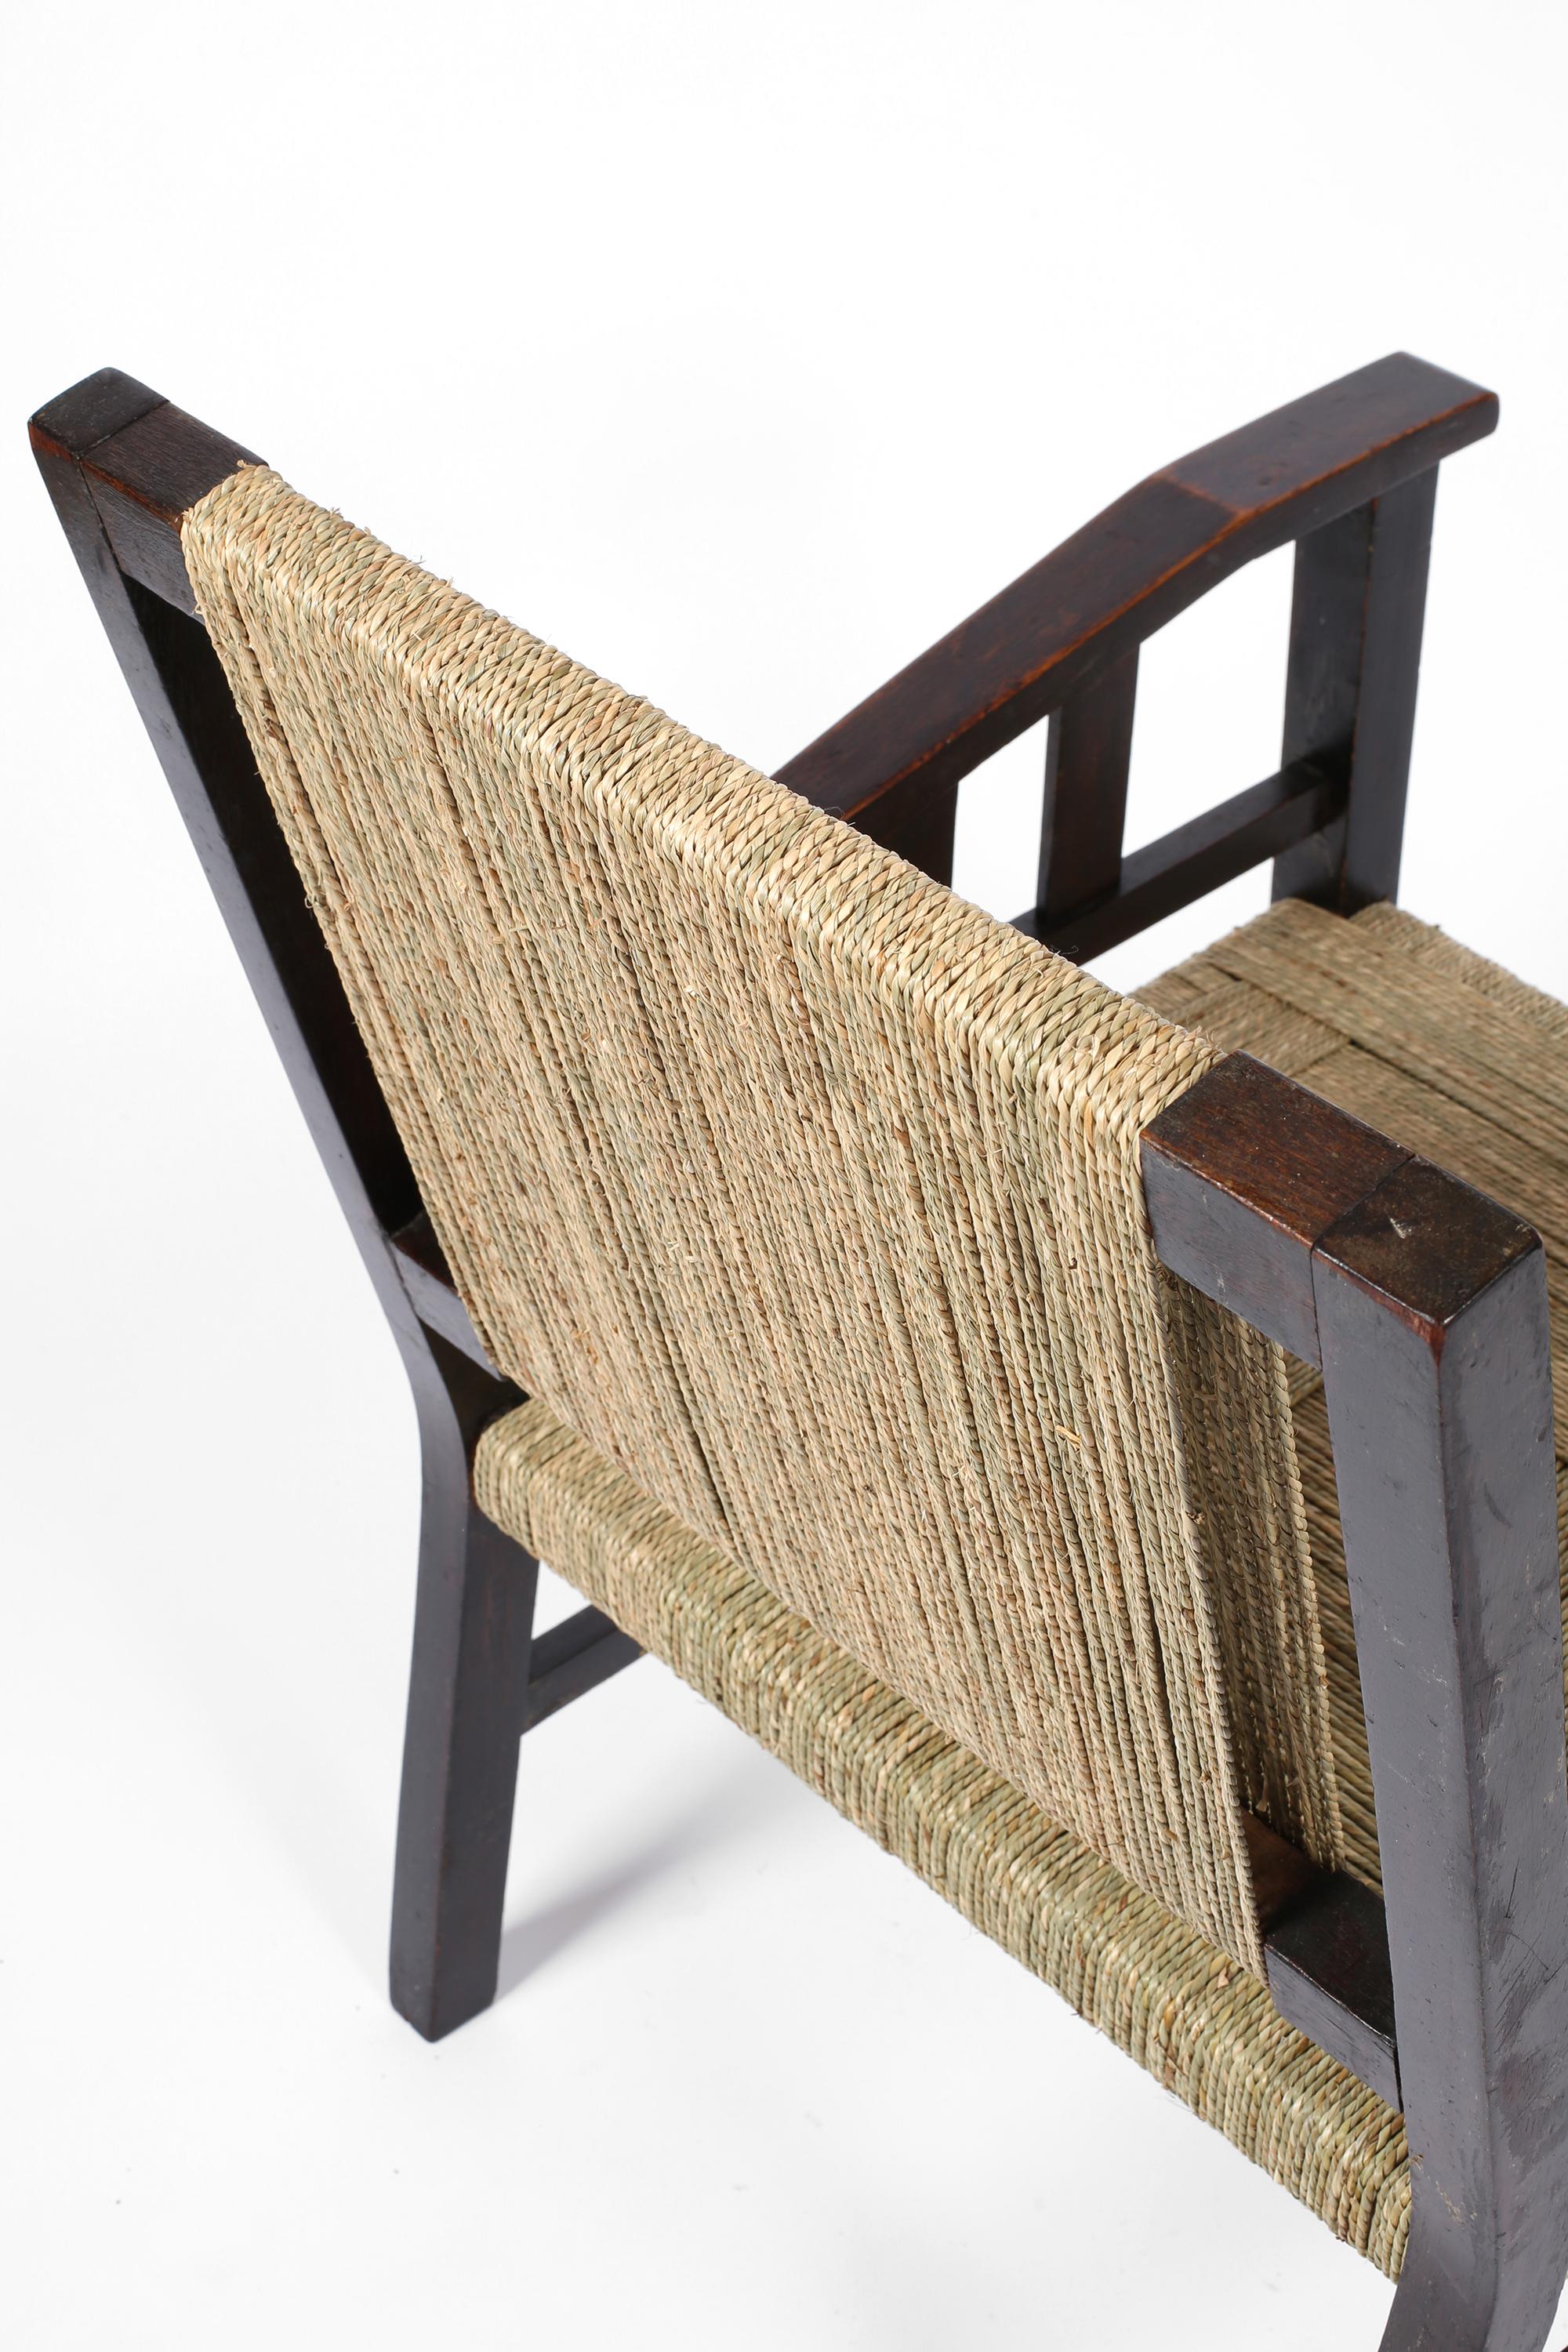 1930s French Modernist Art Deco Armchair by Francis Jourdain in Beech and Rope For Sale 1